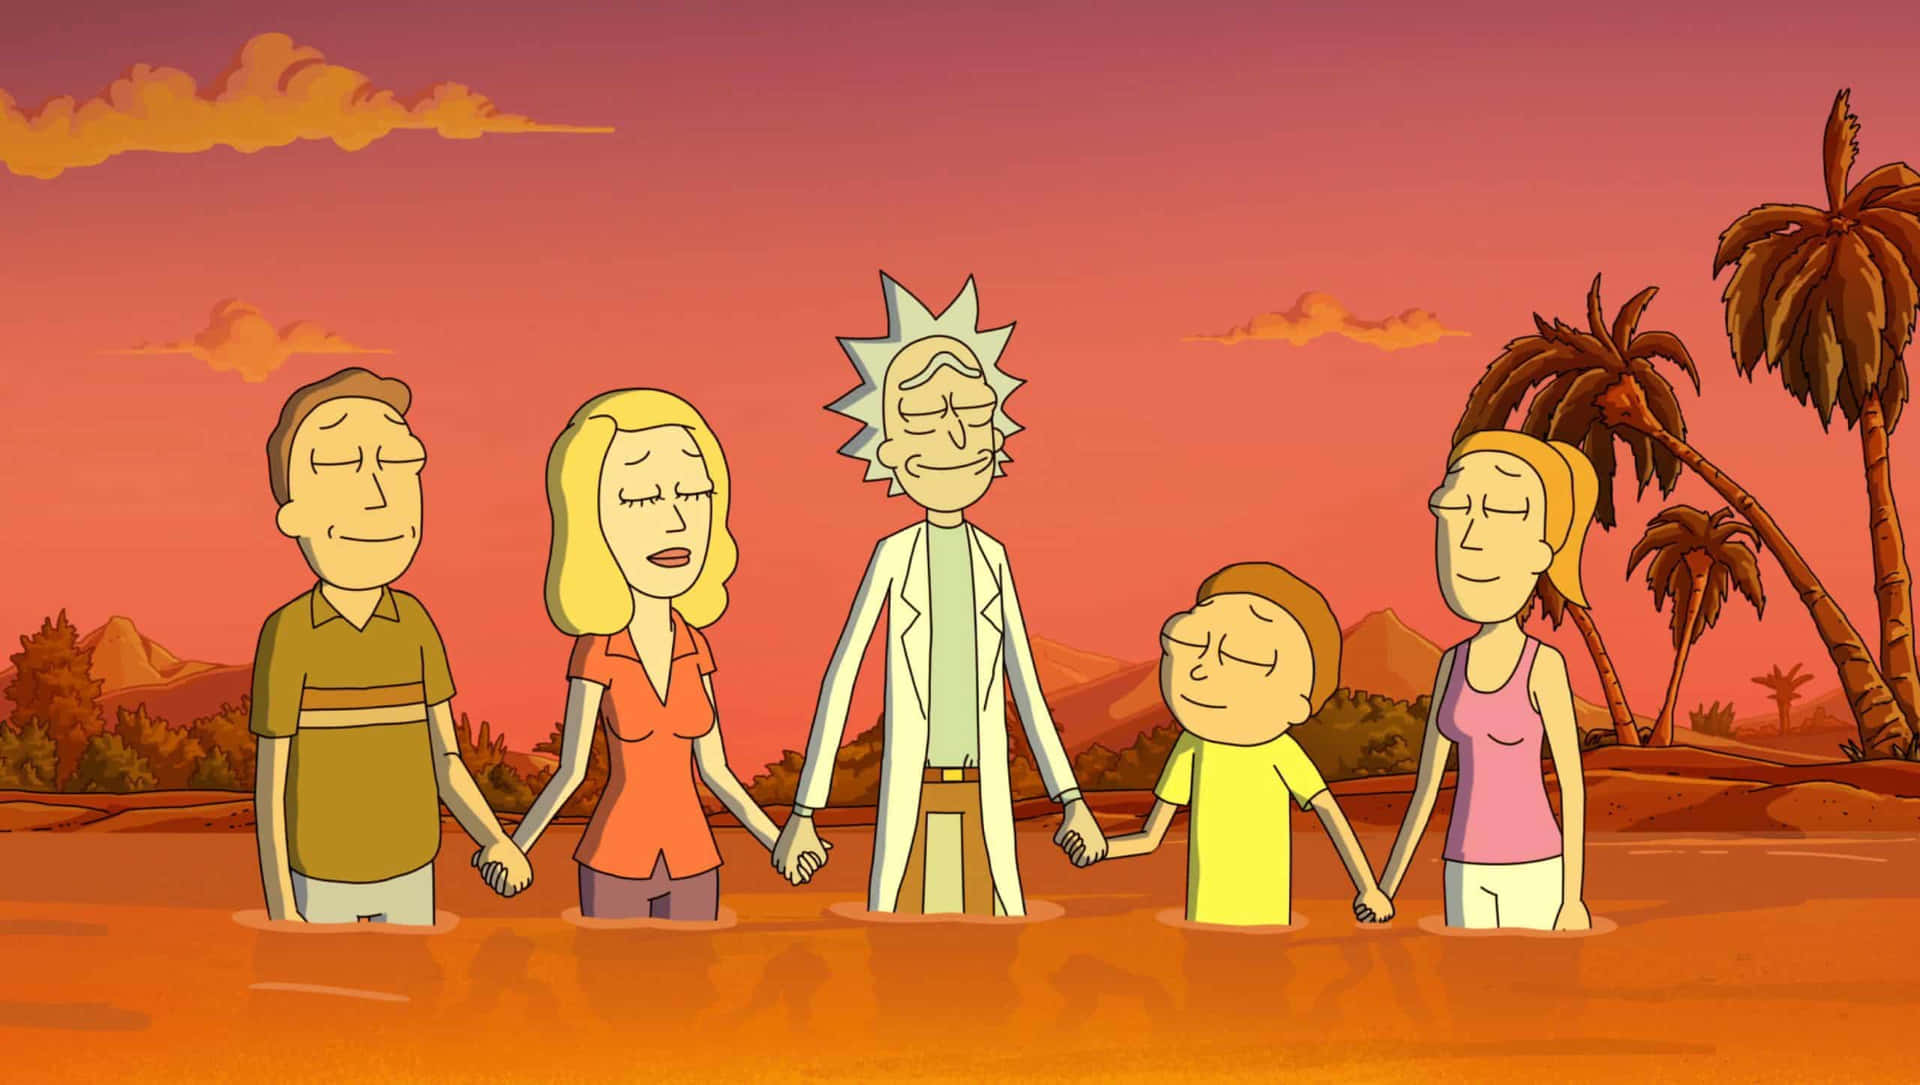 Rick and Morty are best friends experiencing crazy adventures